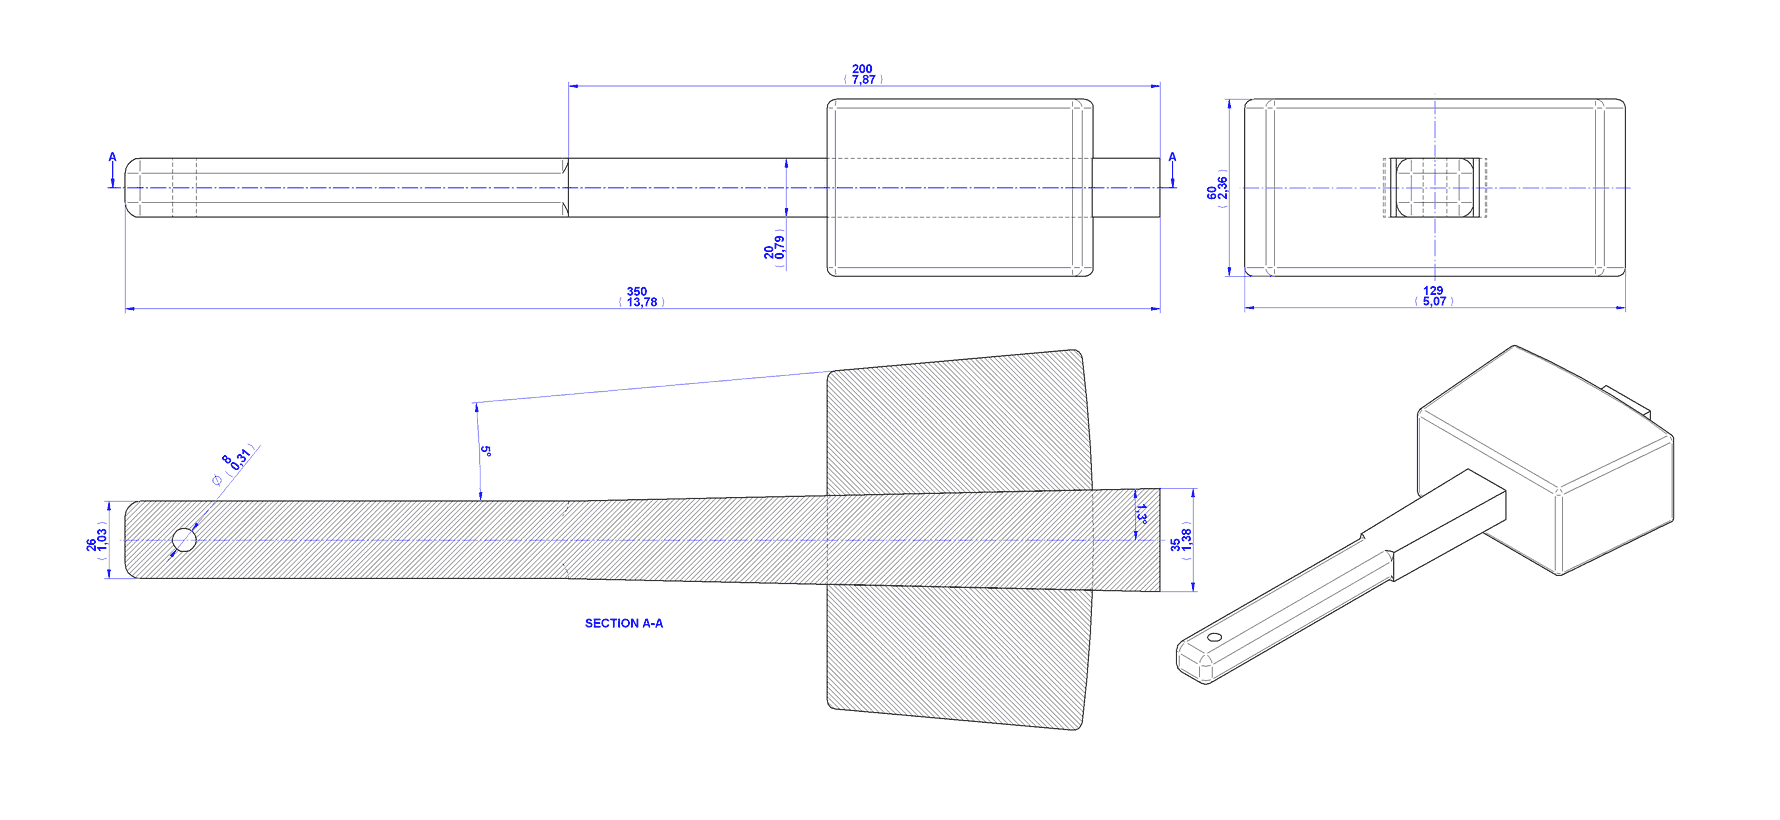 Wood for Woodworking Mallet Plans